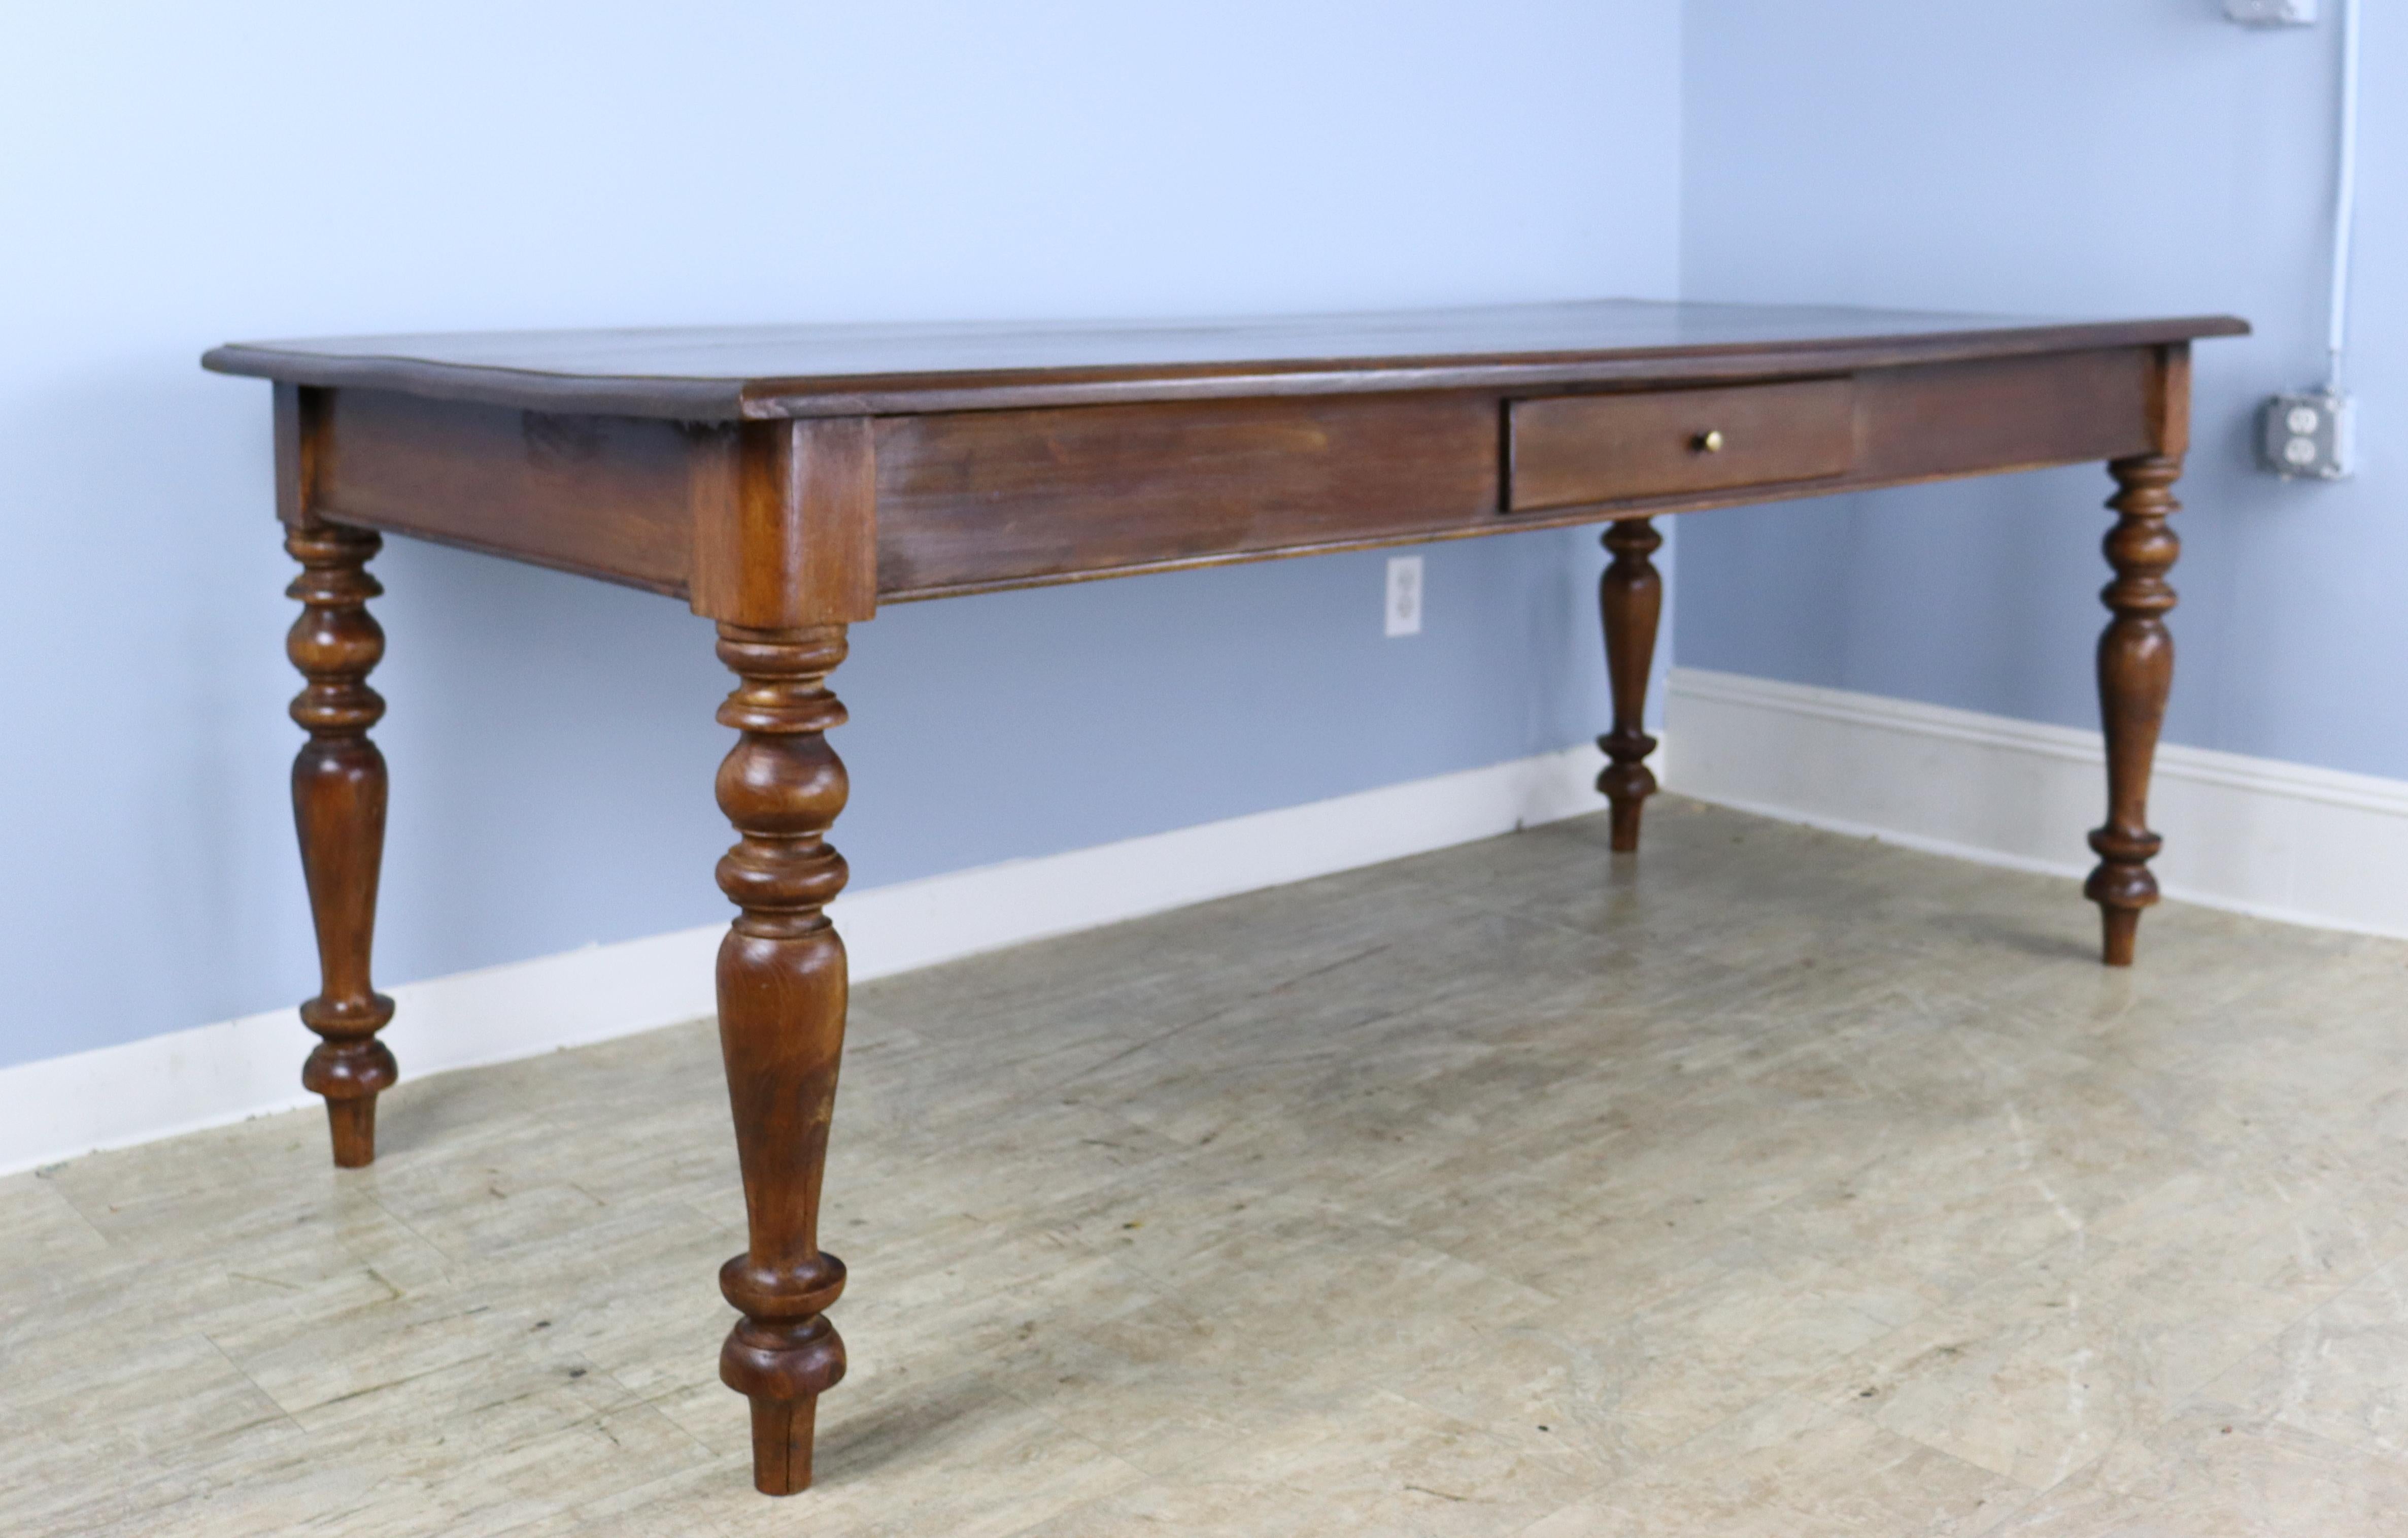 The best of both worlds. A handsome dark oak farm table with the look of an antique, but with the proportions of a modern dining table. The top and legs are in very good condition. Nice and deep to accommodate platters and chargers, the apron height